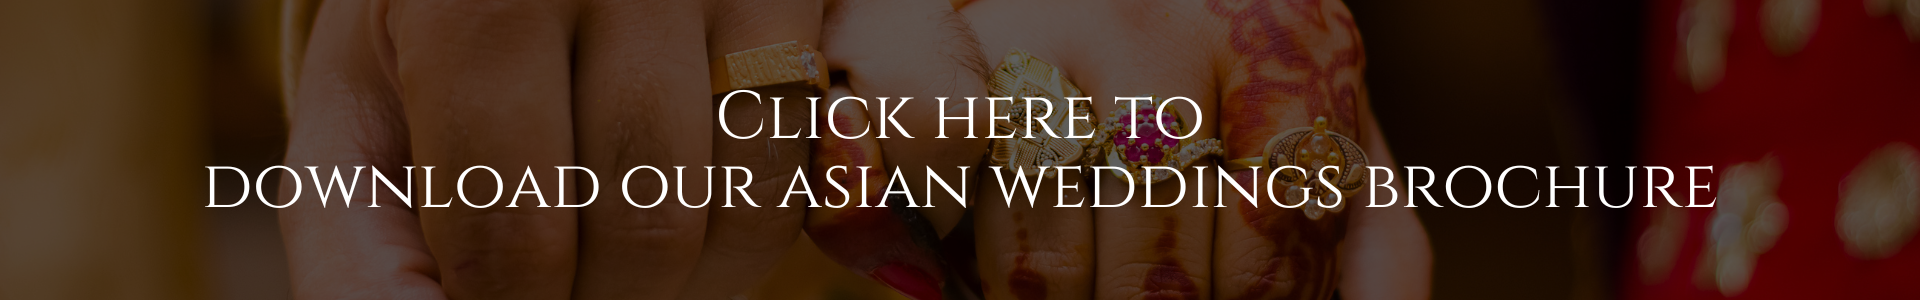 Download our asian wedding brochure text over an asian wedding couple holding hands